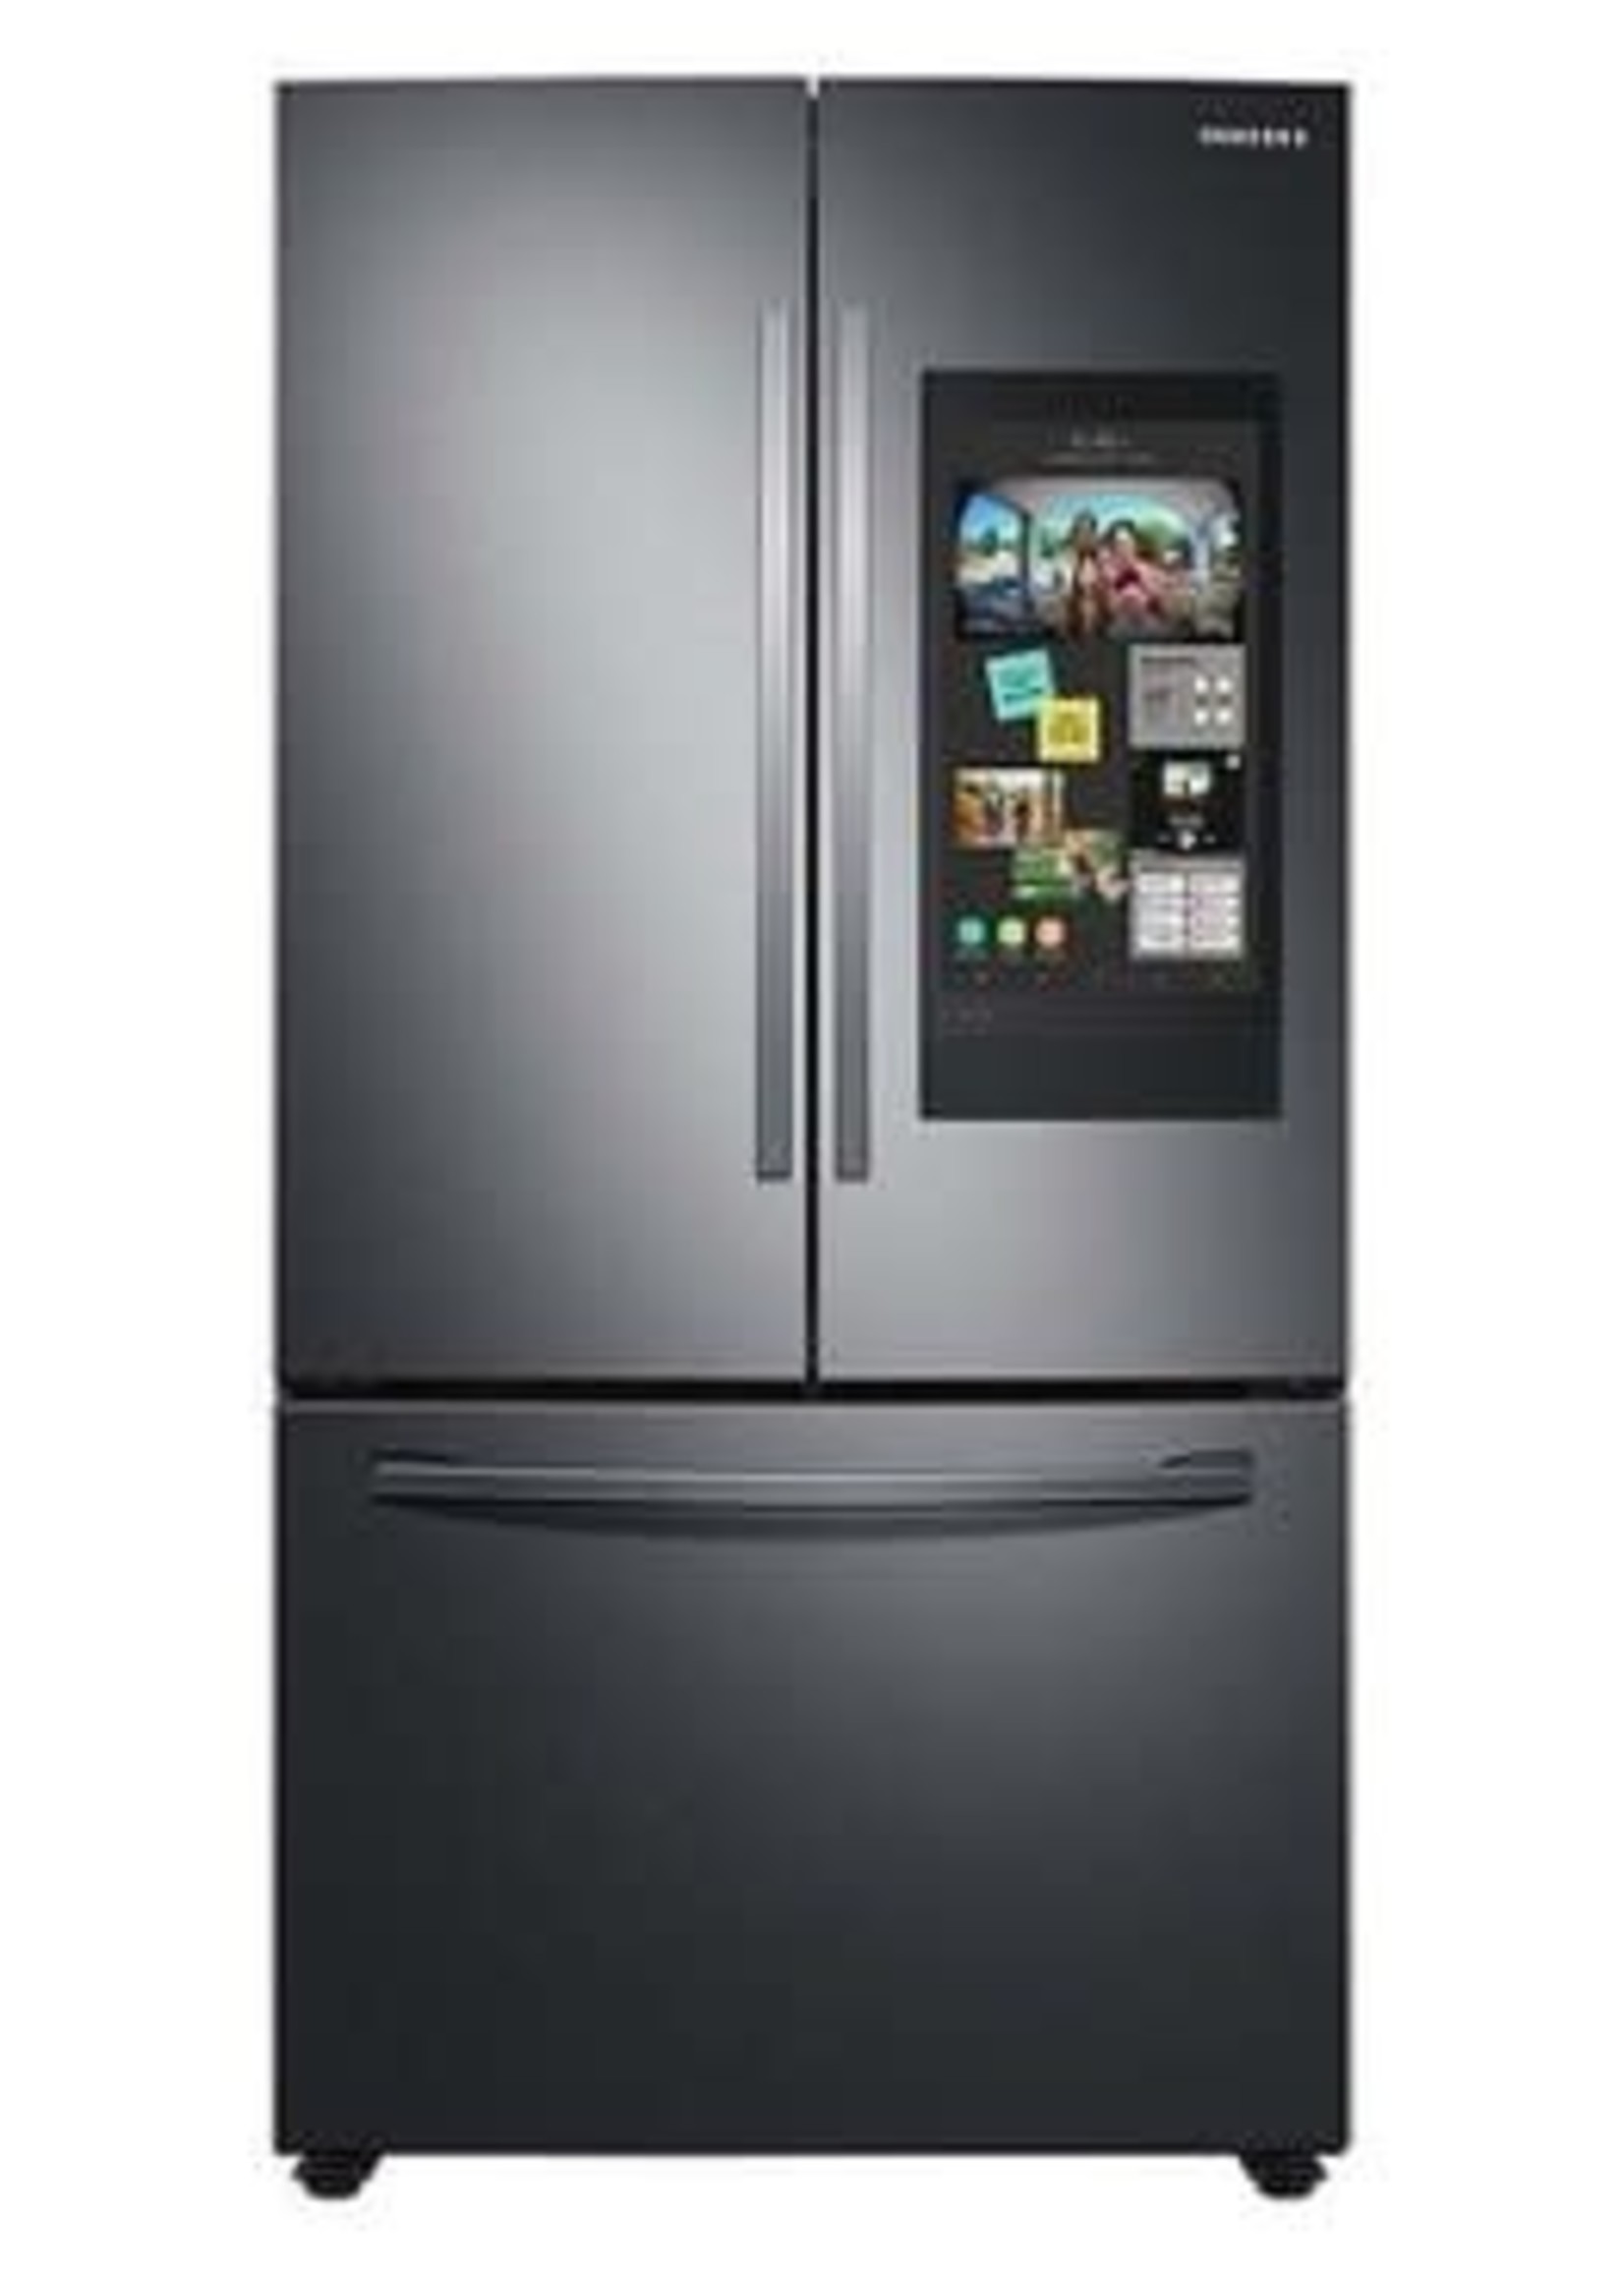 Samsung *Samsung RF28T5F01SG  28 cu. ft. 3-Door French Door Refrigerator with Family Hub - Black stainless steel